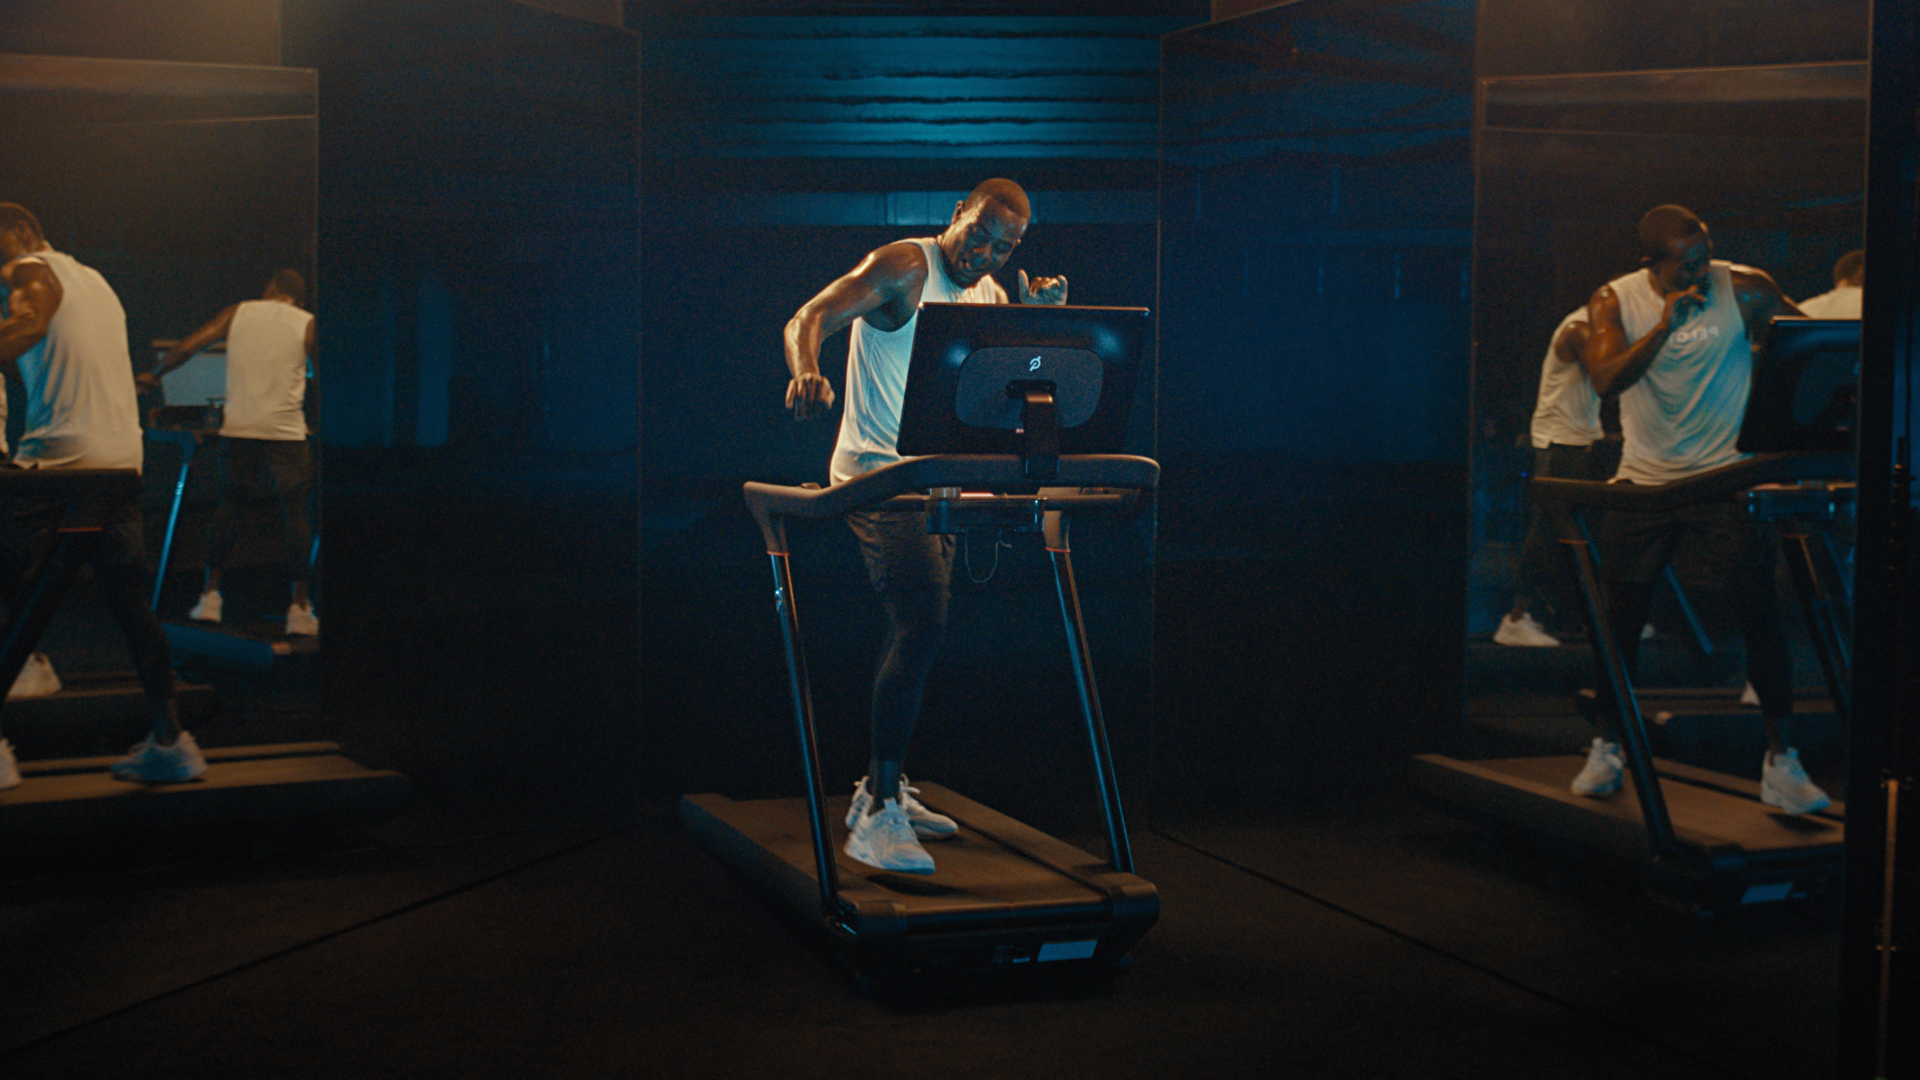 Peloton's 2023 Holiday Campaign titled Work Out Your Way serves as a celebration of movement, and the freedom that comes when you let go of your inhibitions and immerse yourself into a workout.